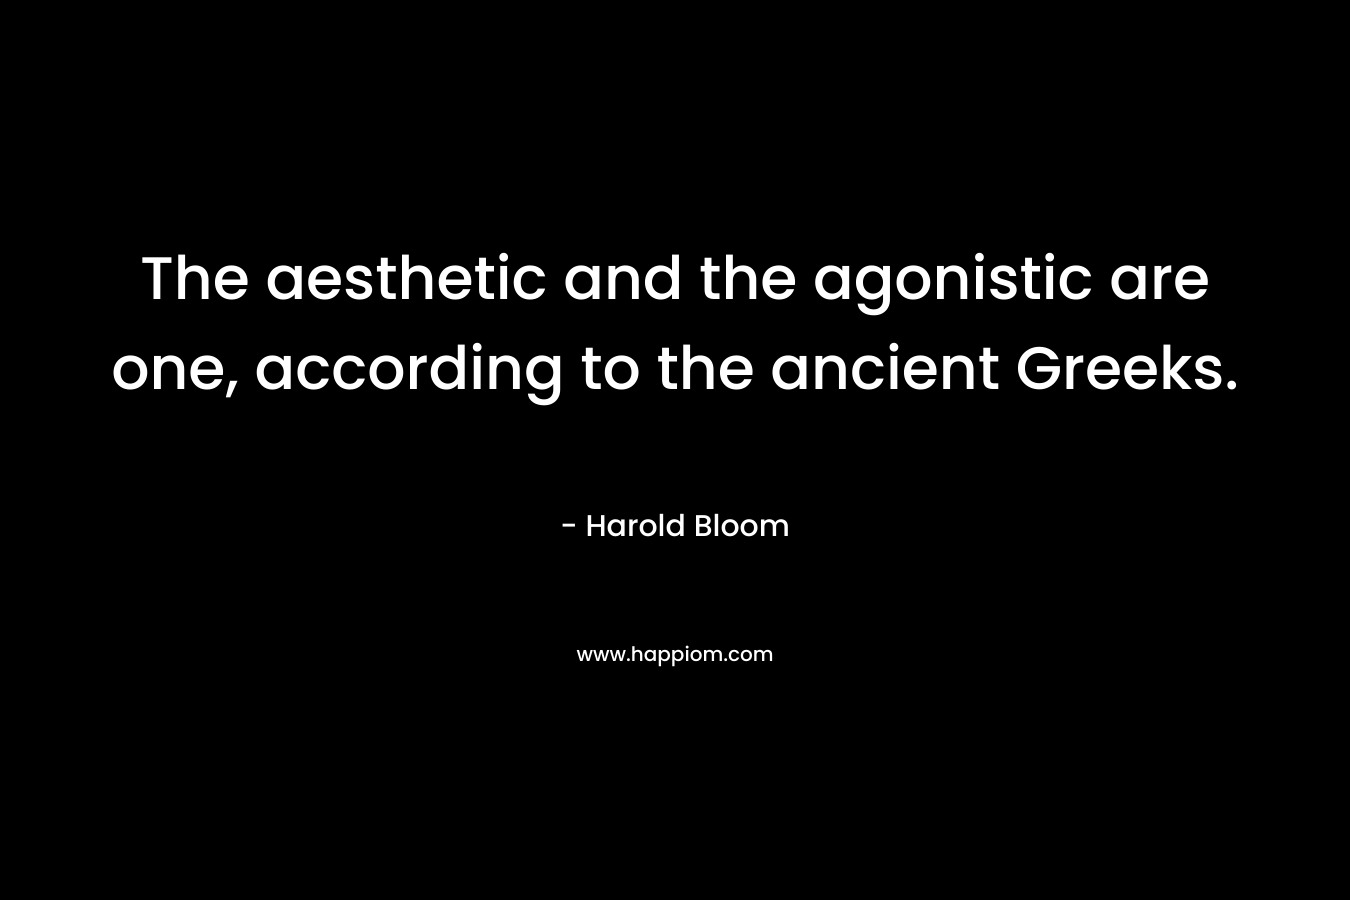 The aesthetic and the agonistic are one, according to the ancient Greeks.